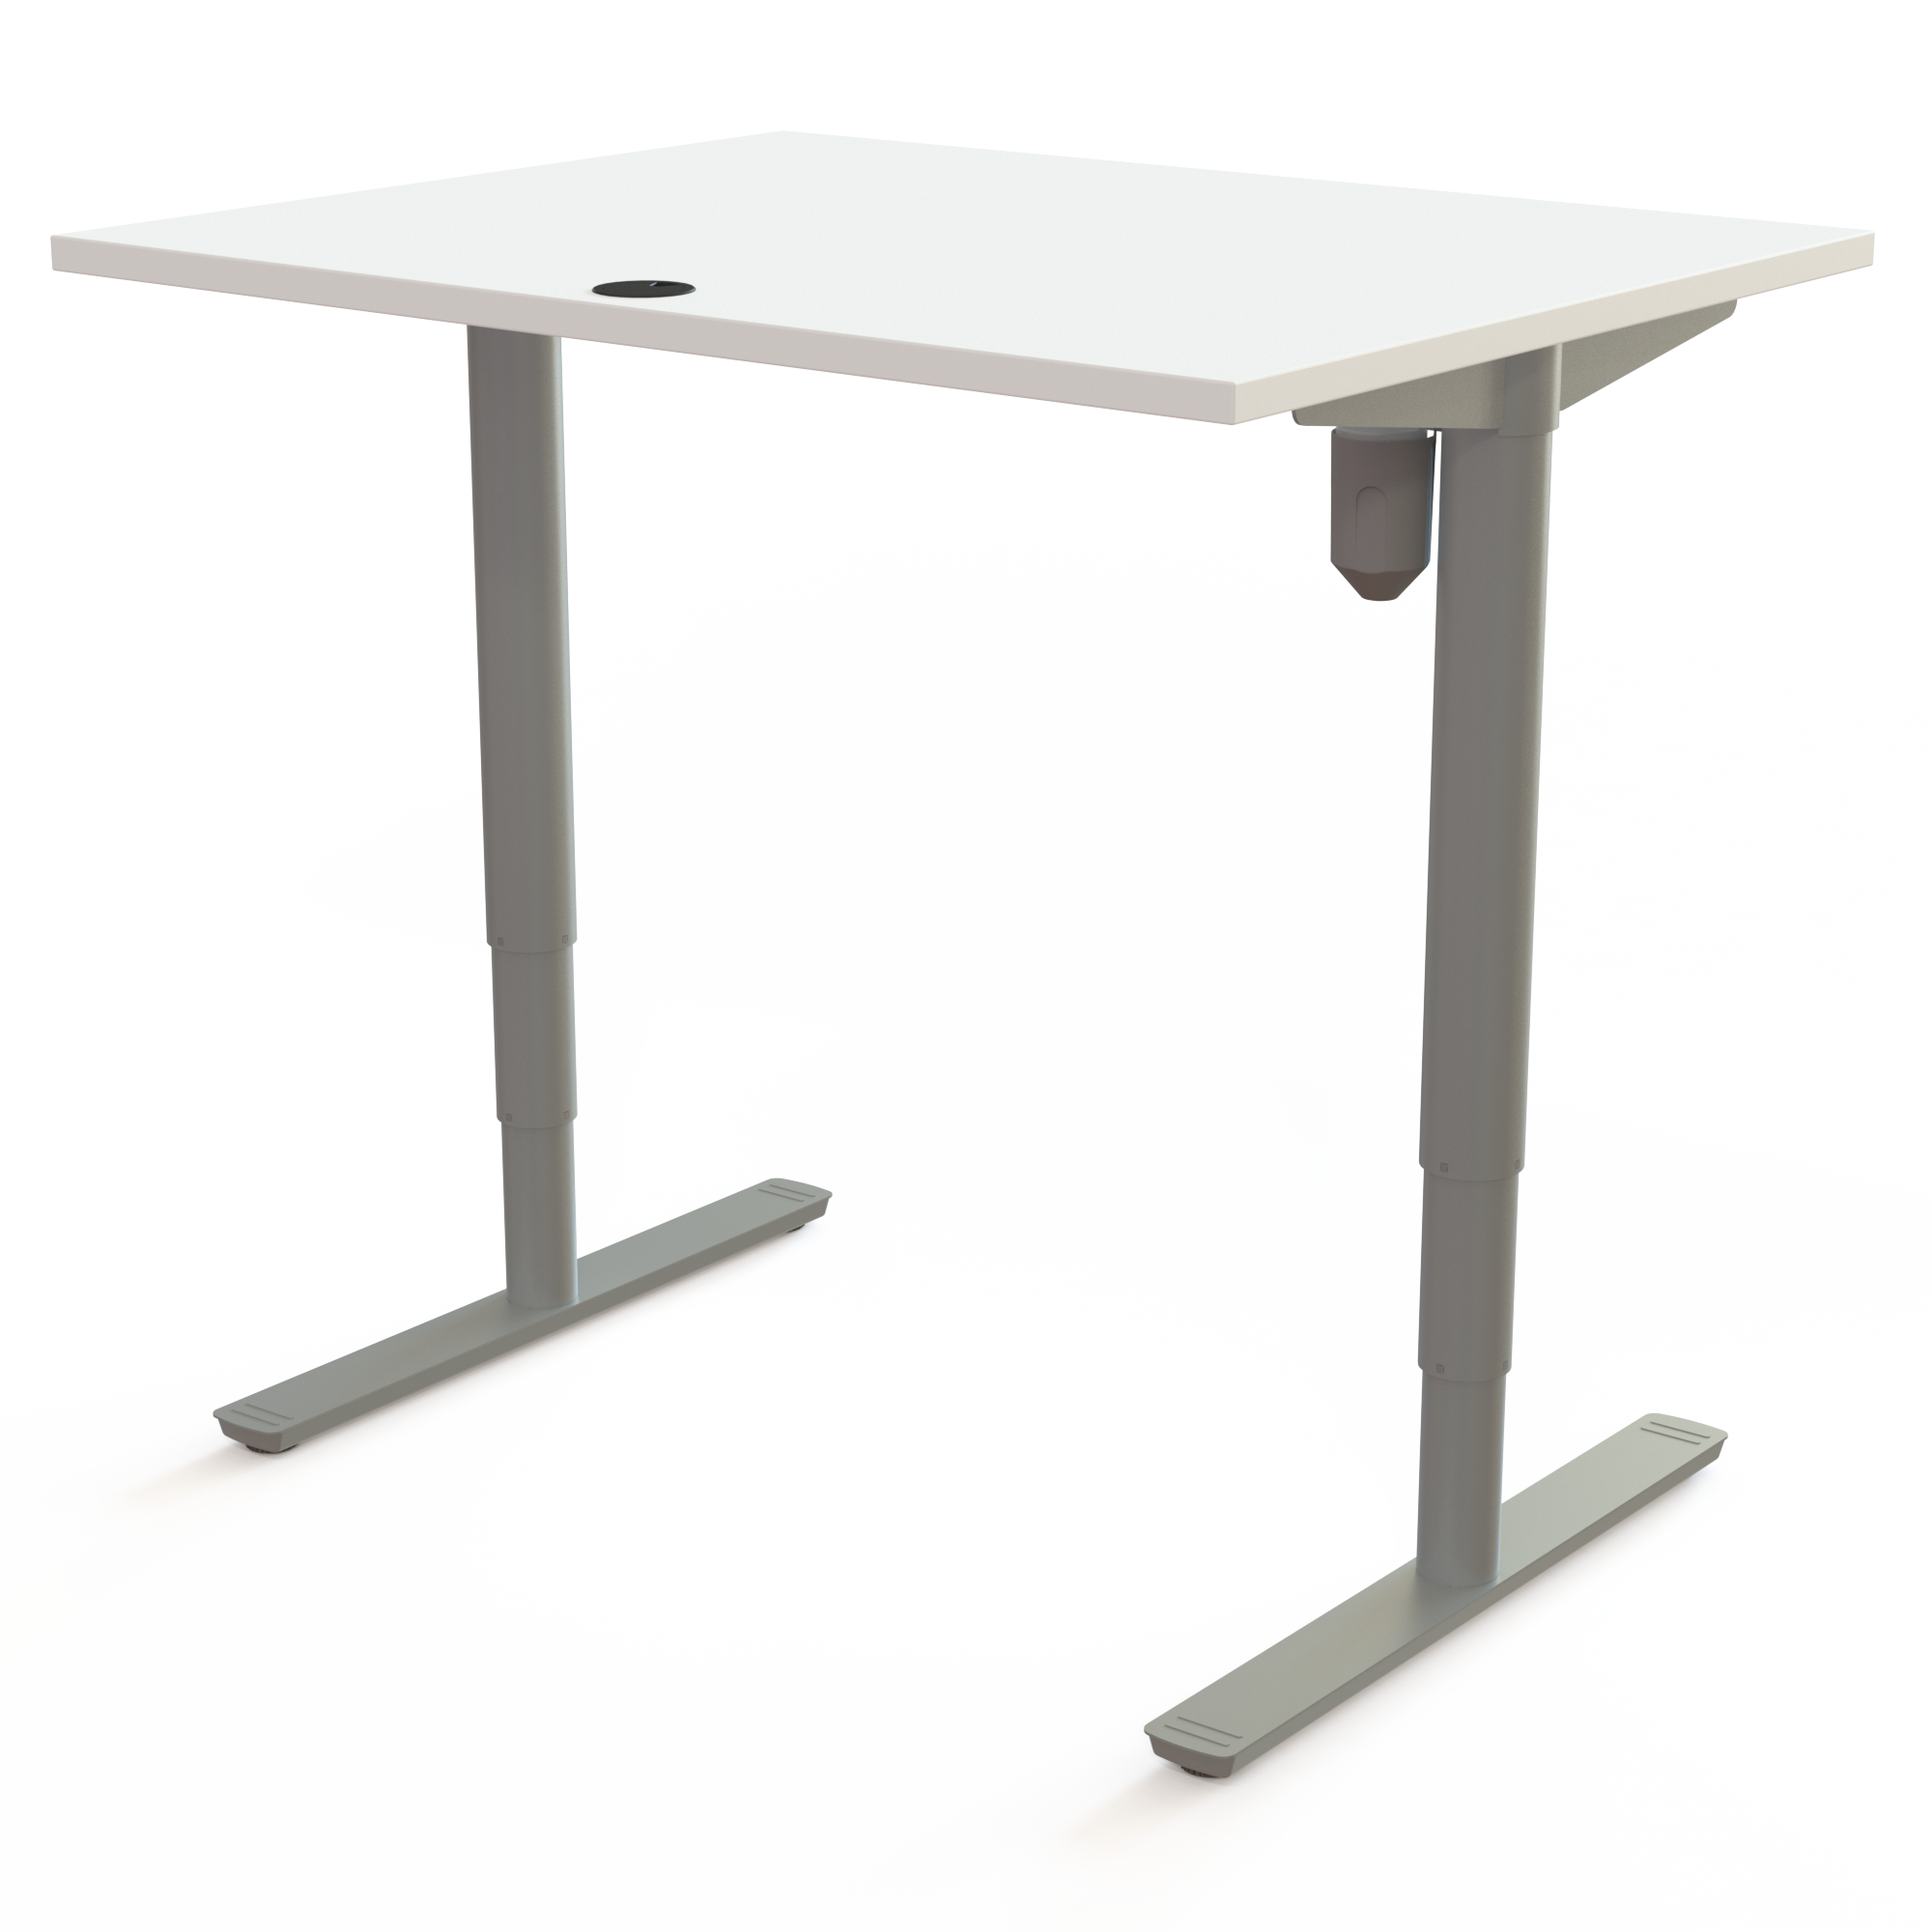 Electric Adjustable Desk | 100x80 cm | White with silver frame